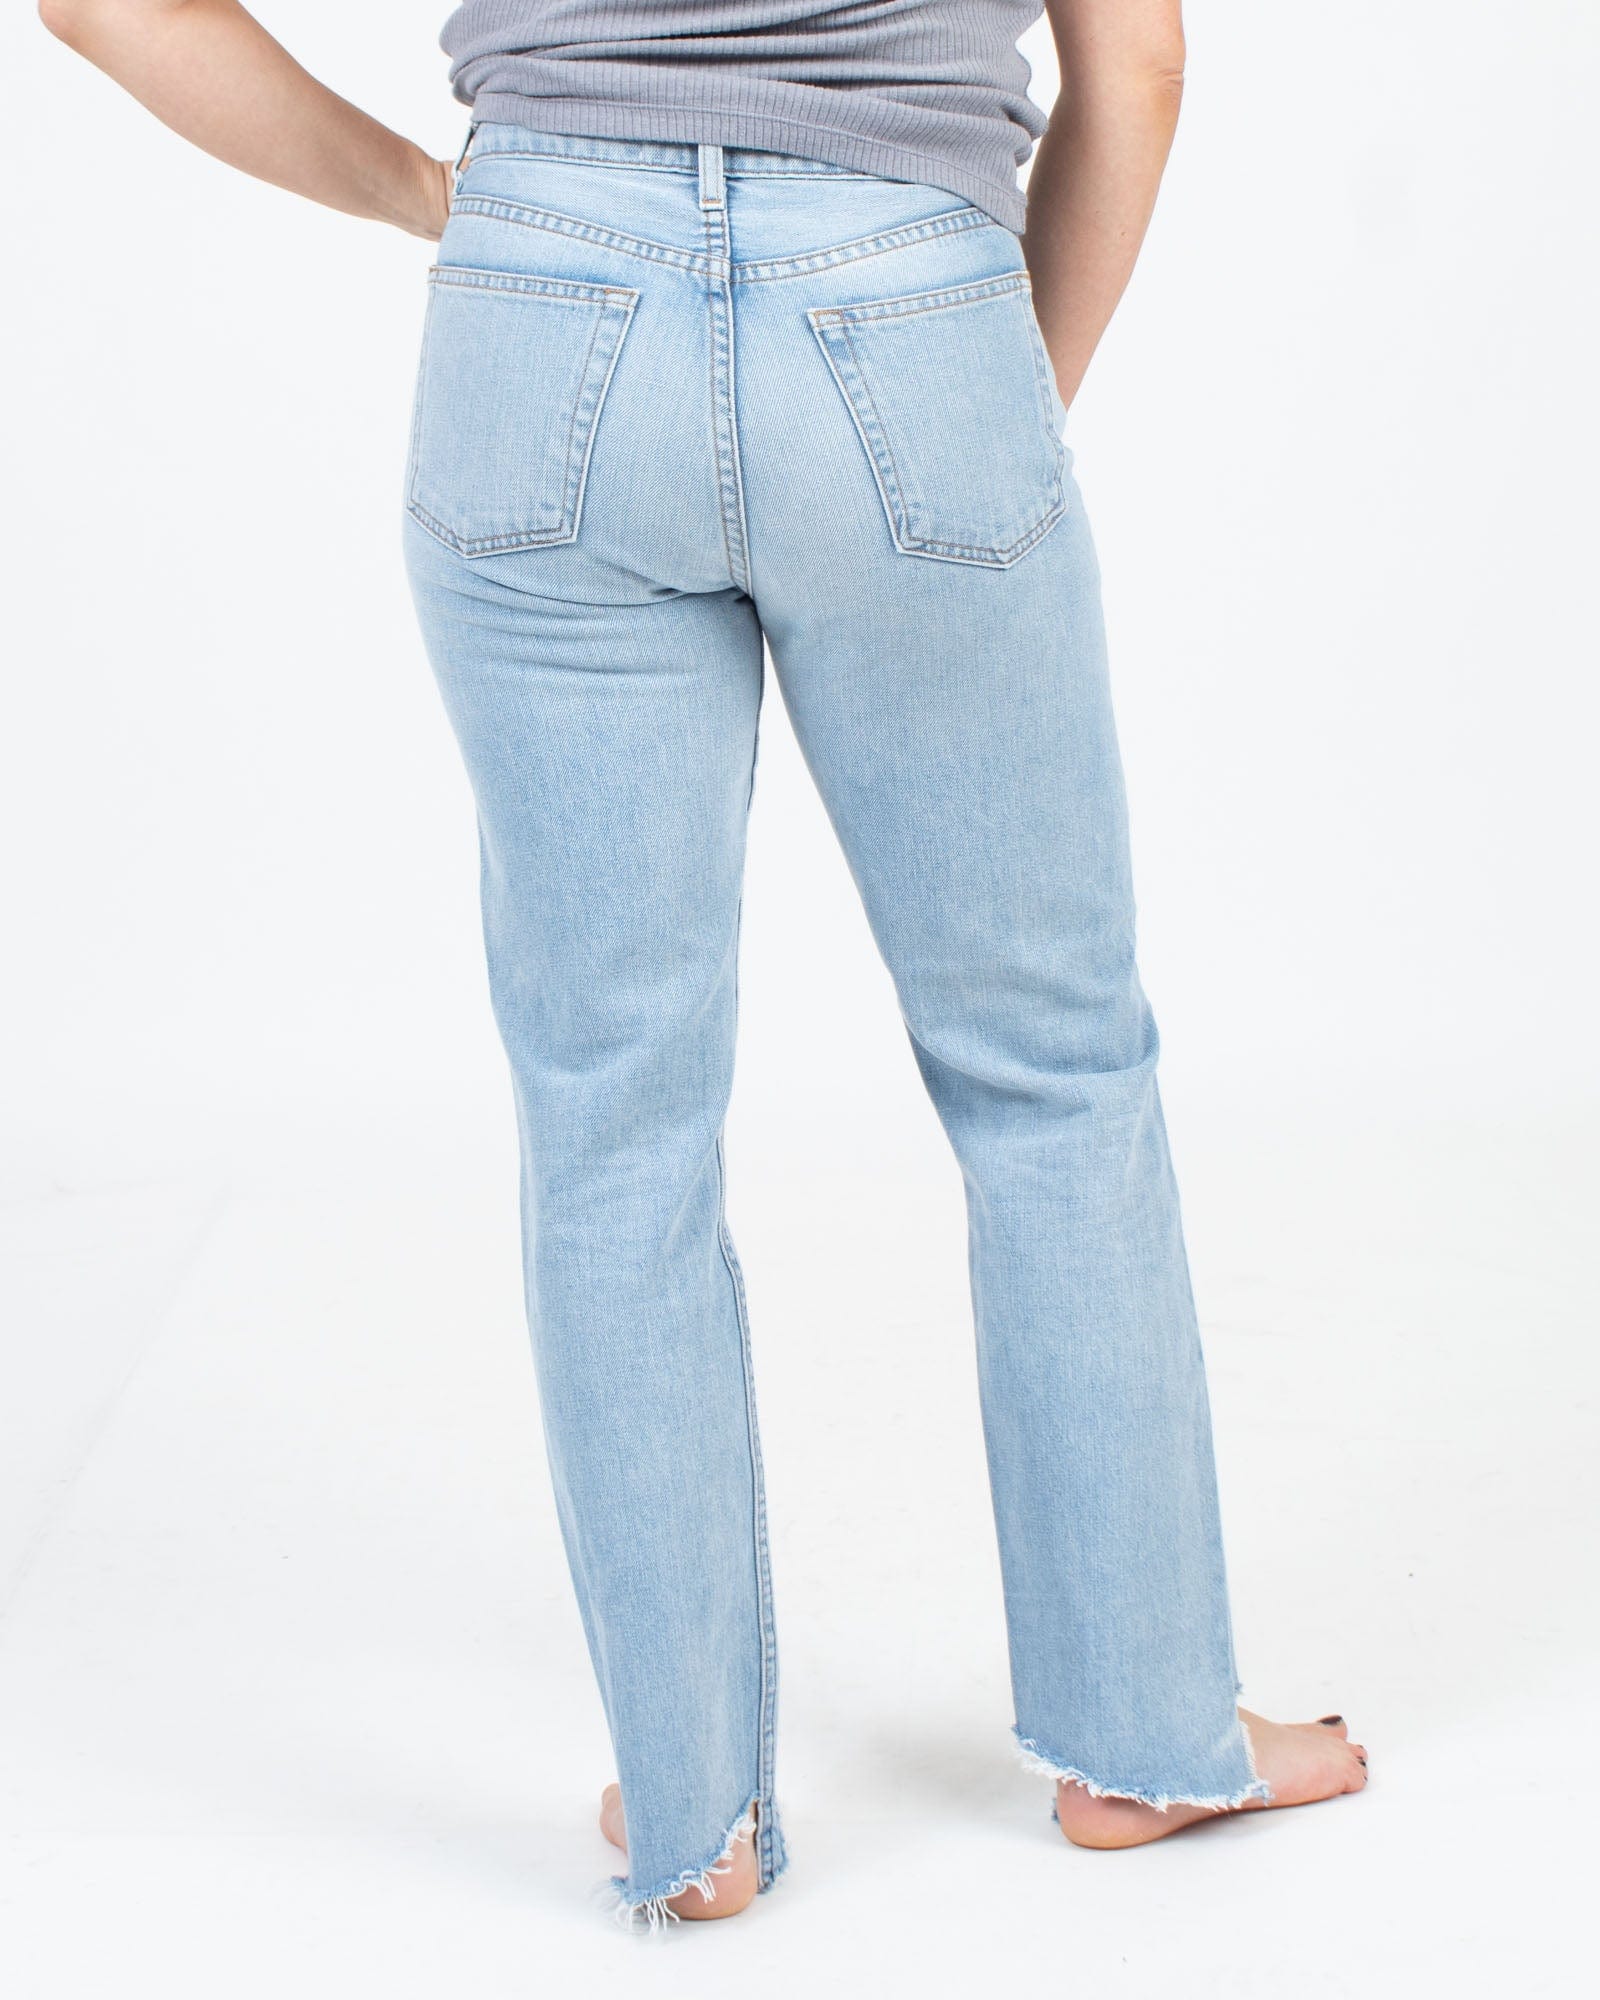 Light Wash Jeans - The